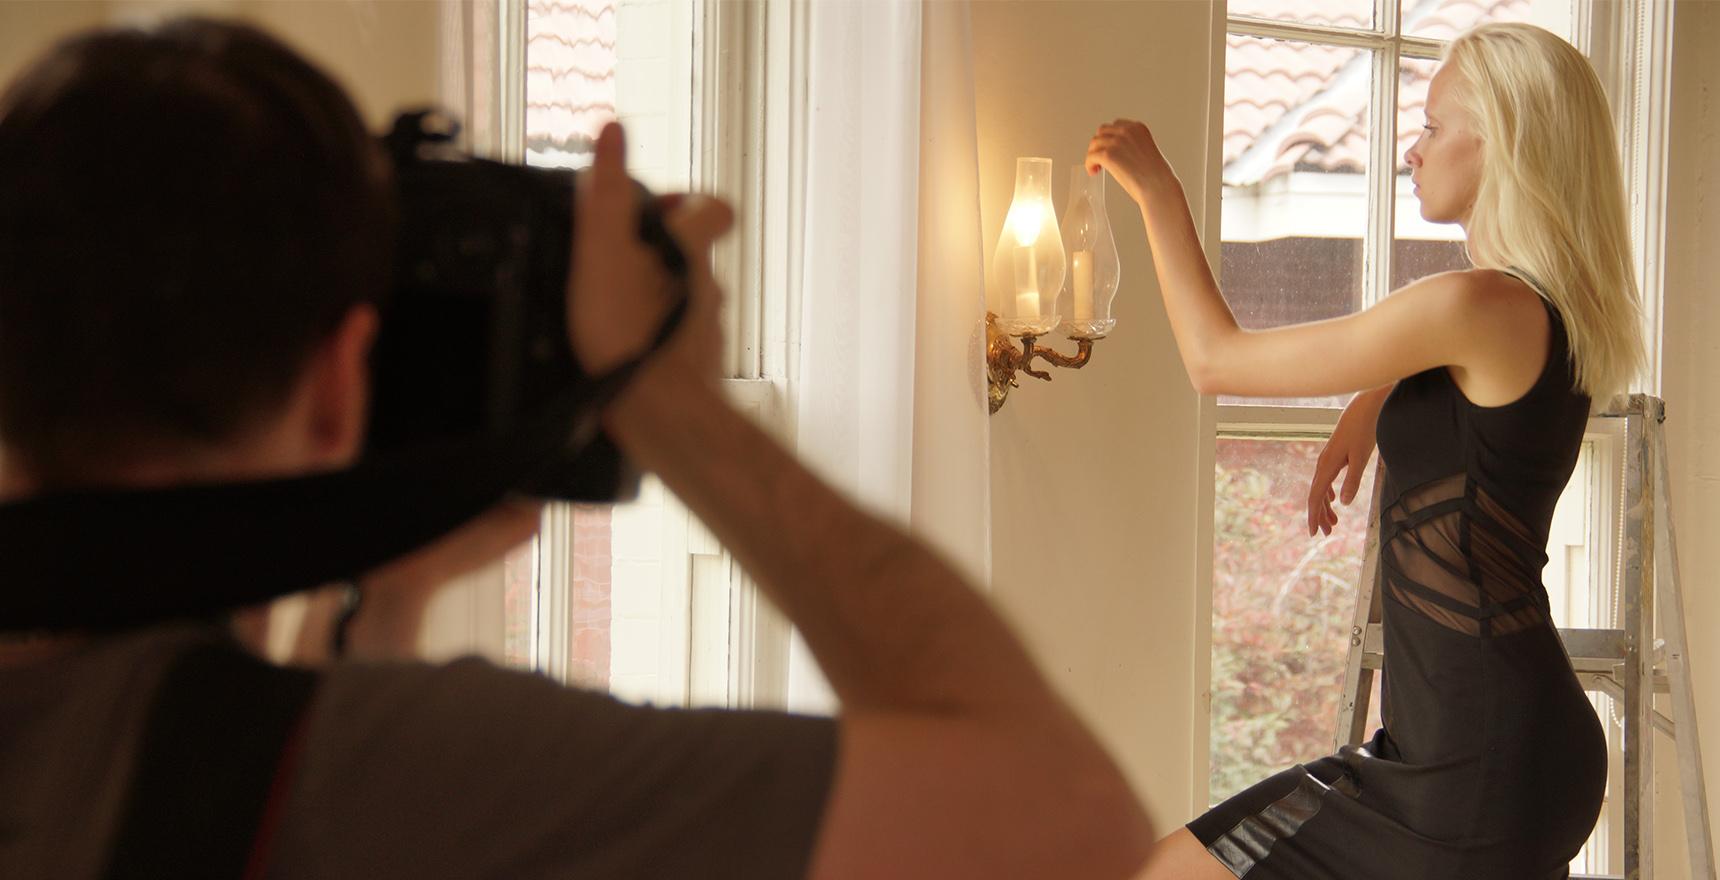 a model being photographed lighting a candle sconce